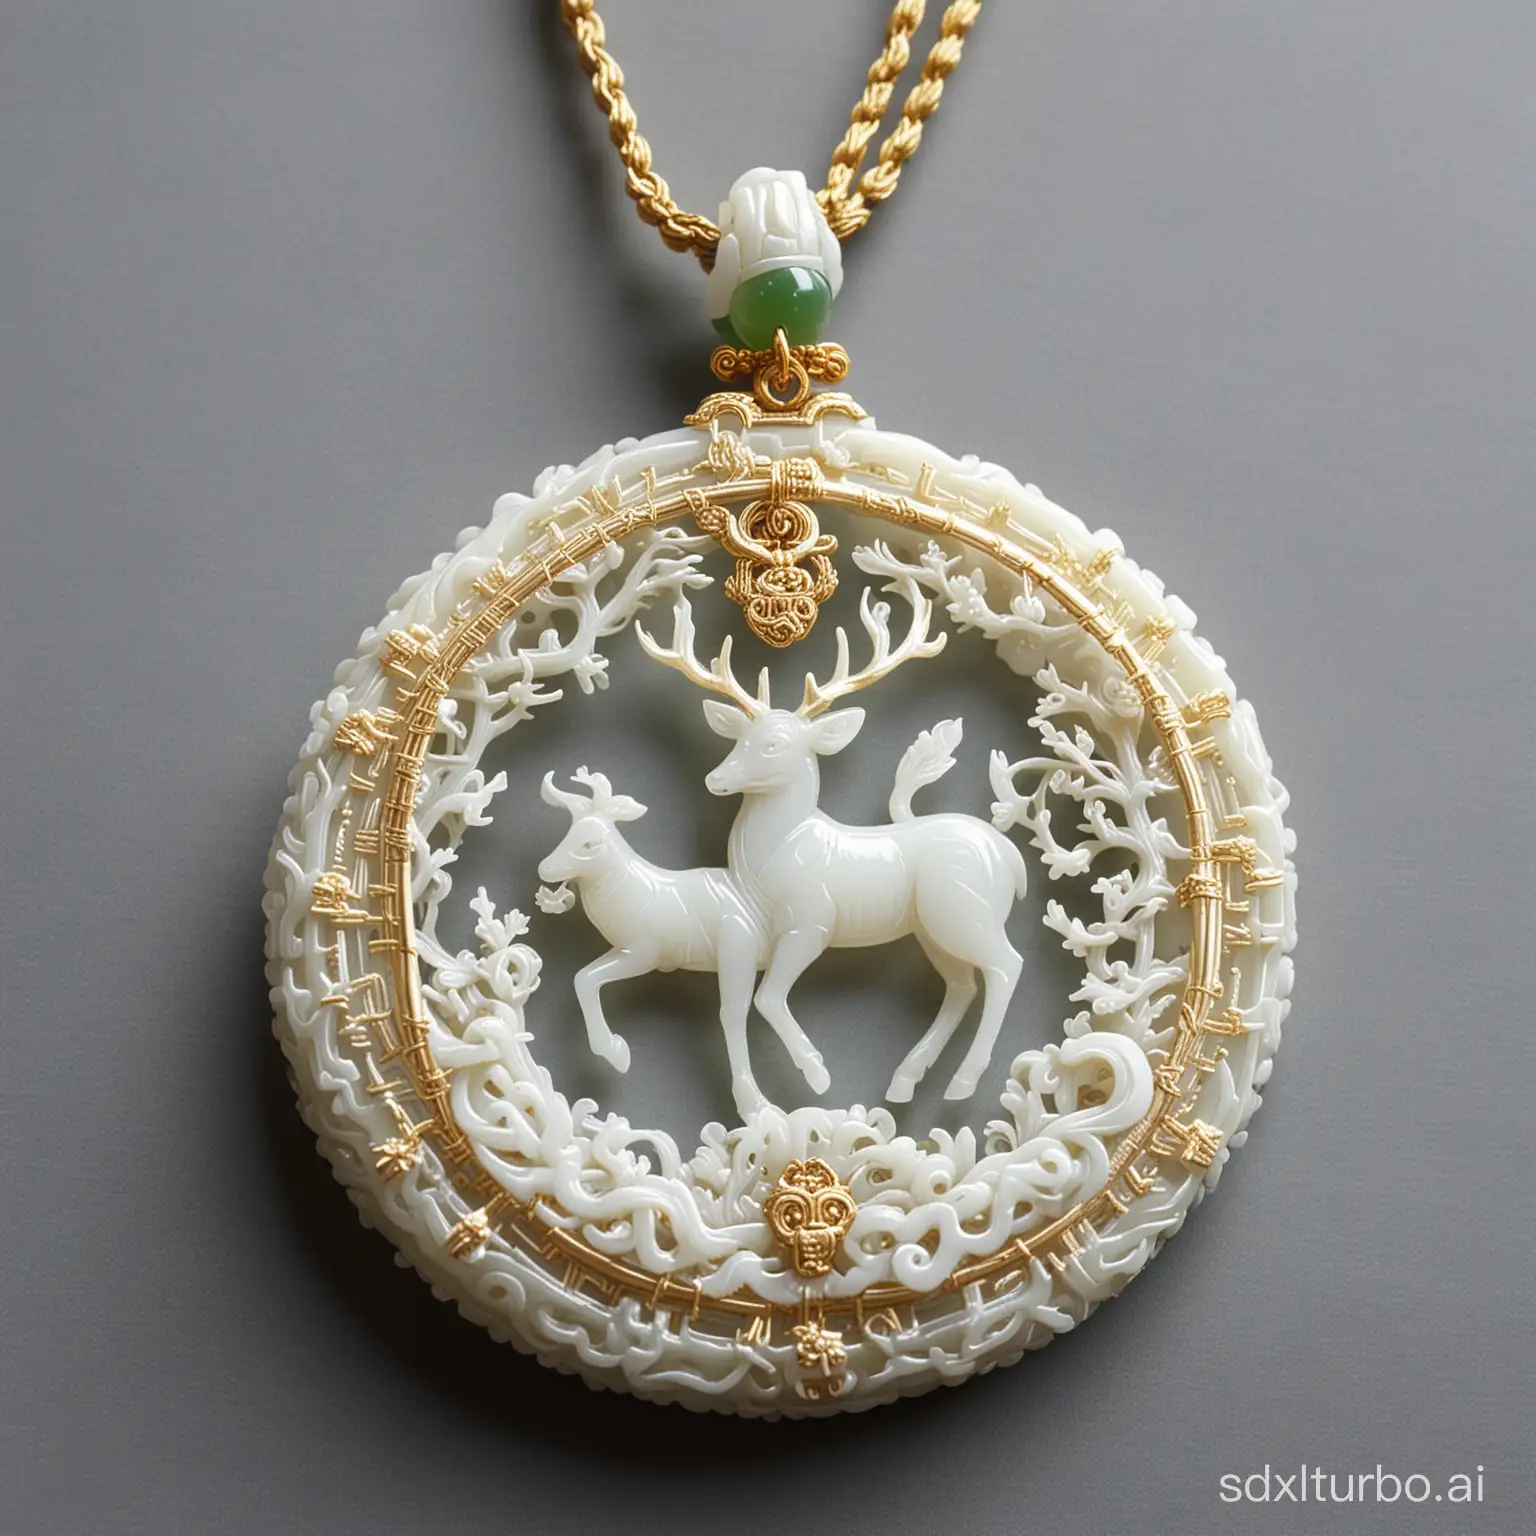 The cultural and creative jade pendant of 'The Deer King's Origin', round pendant, mainly made of white jade, crafted with carving techniques, with tassels made of braided golden threads.